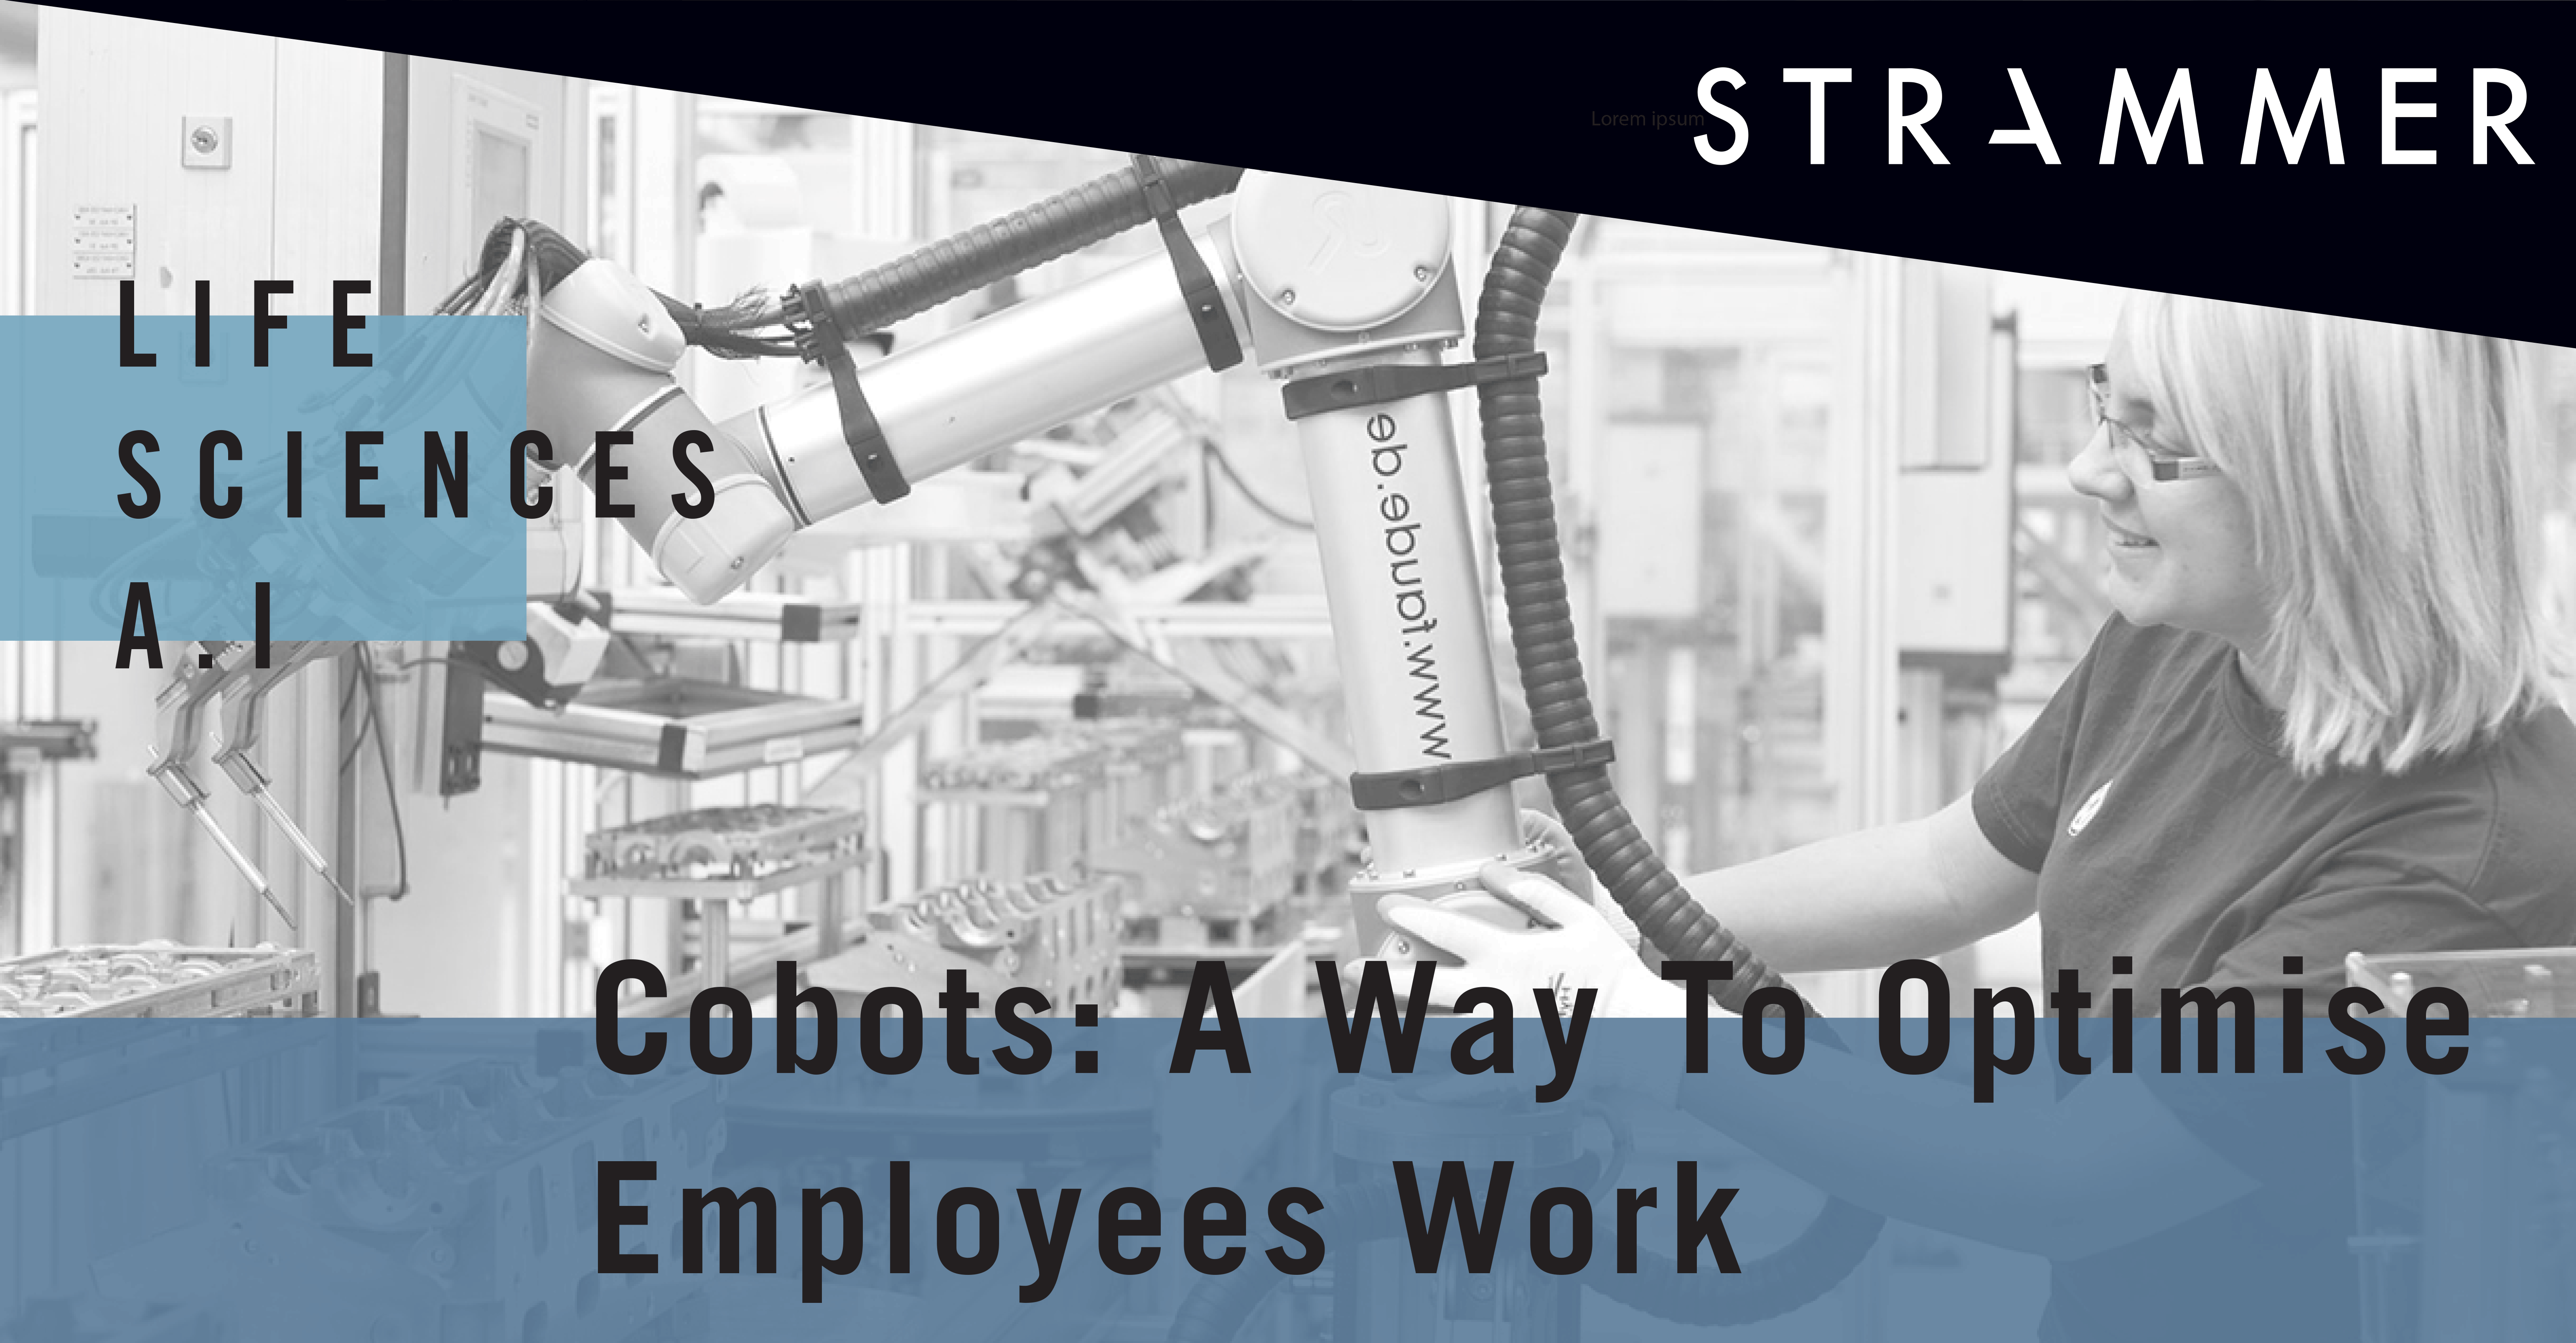 Collaborative Robots In the Life Sciences Industry